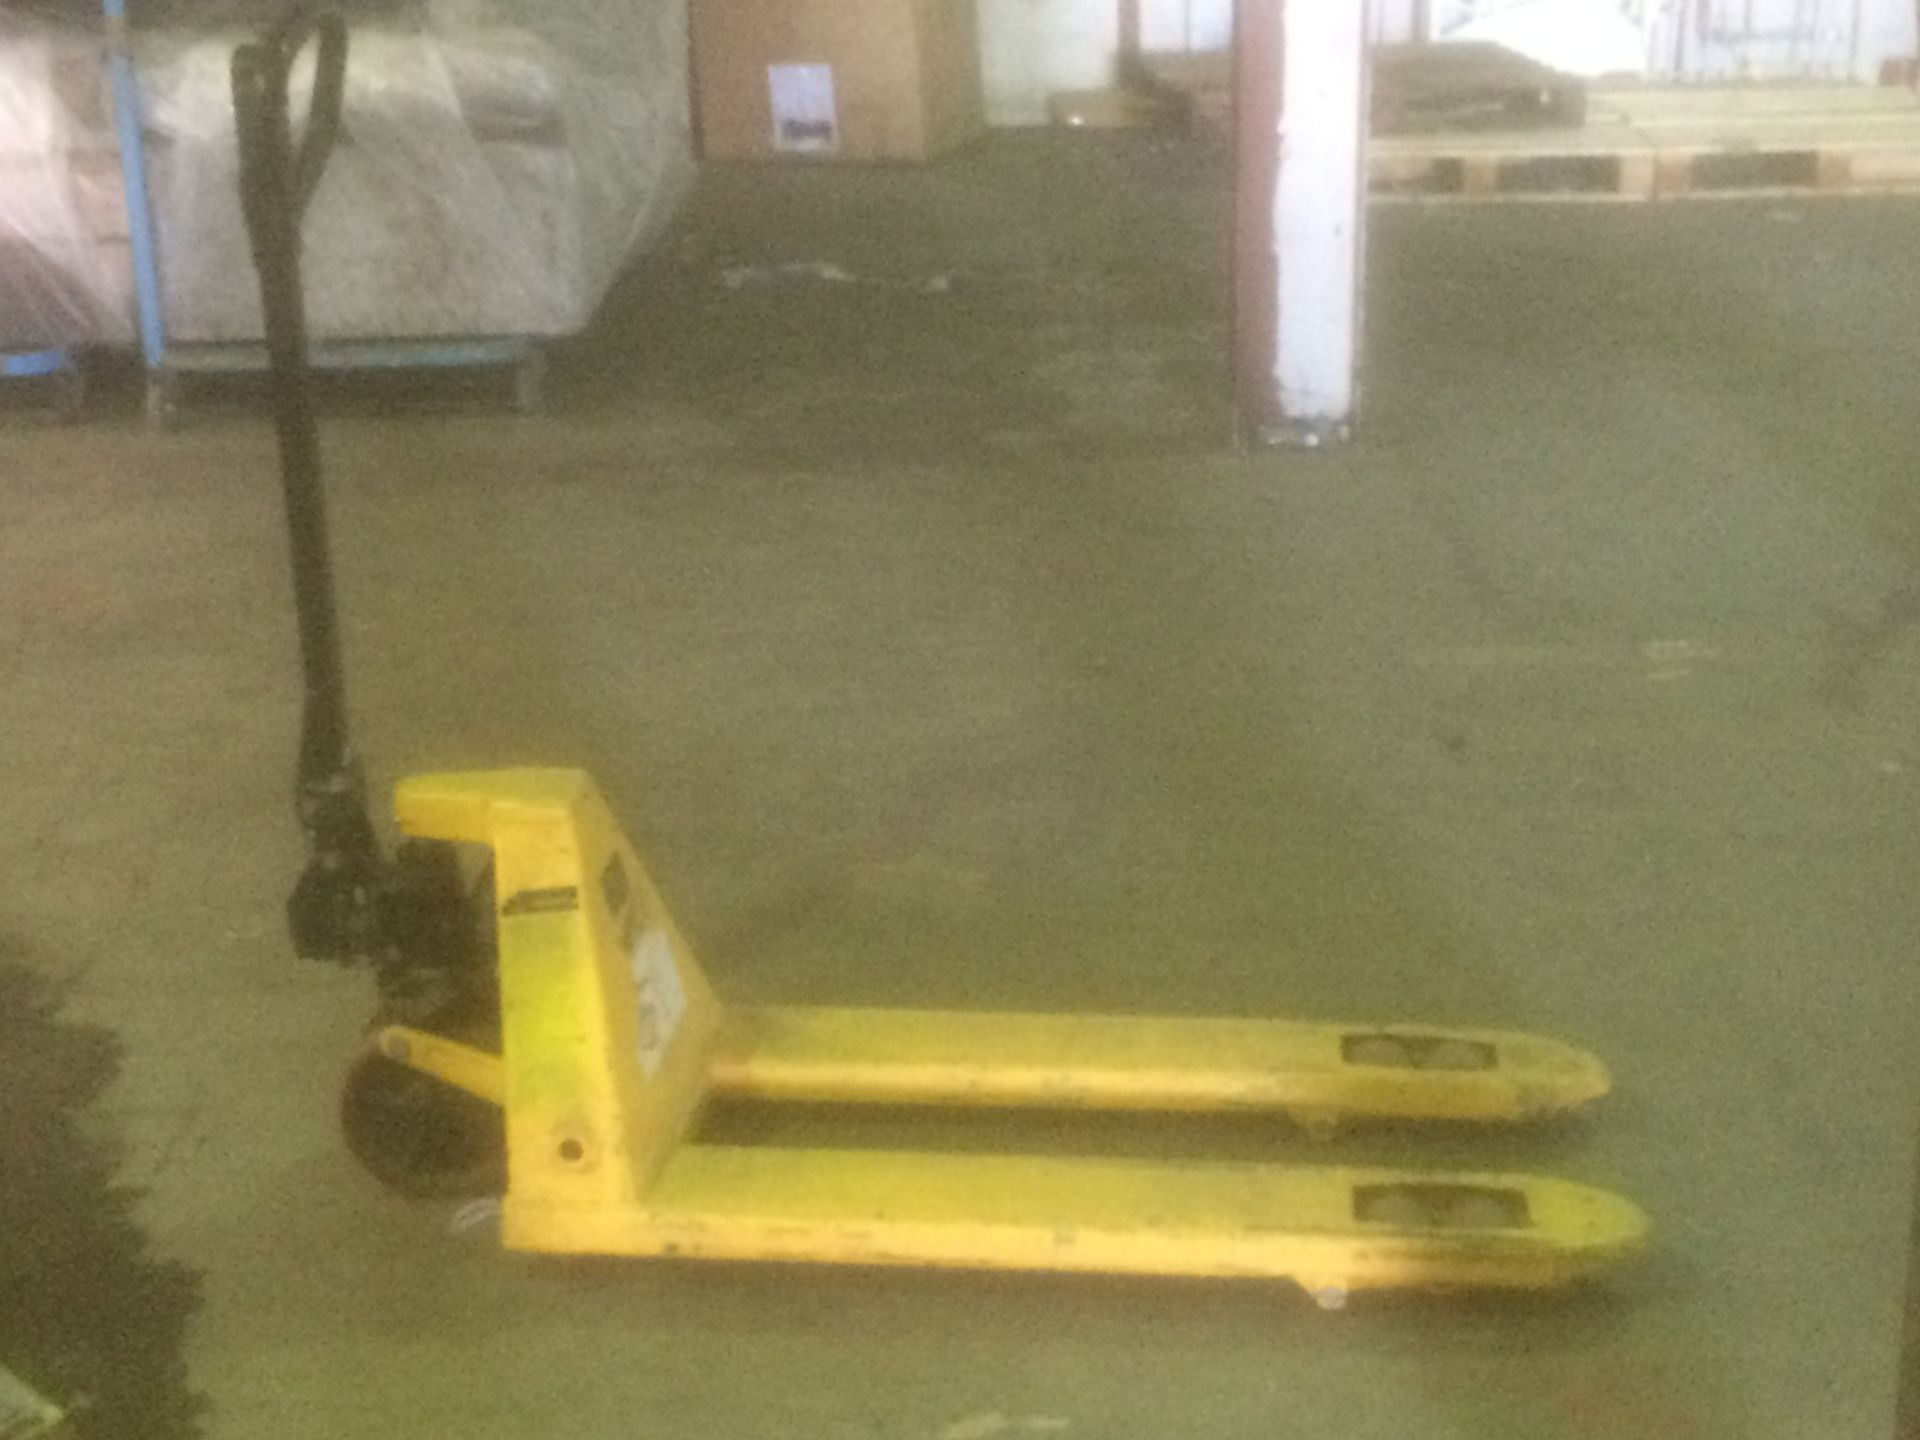 Castle manual lifting pump action pallet truck - Image 2 of 3